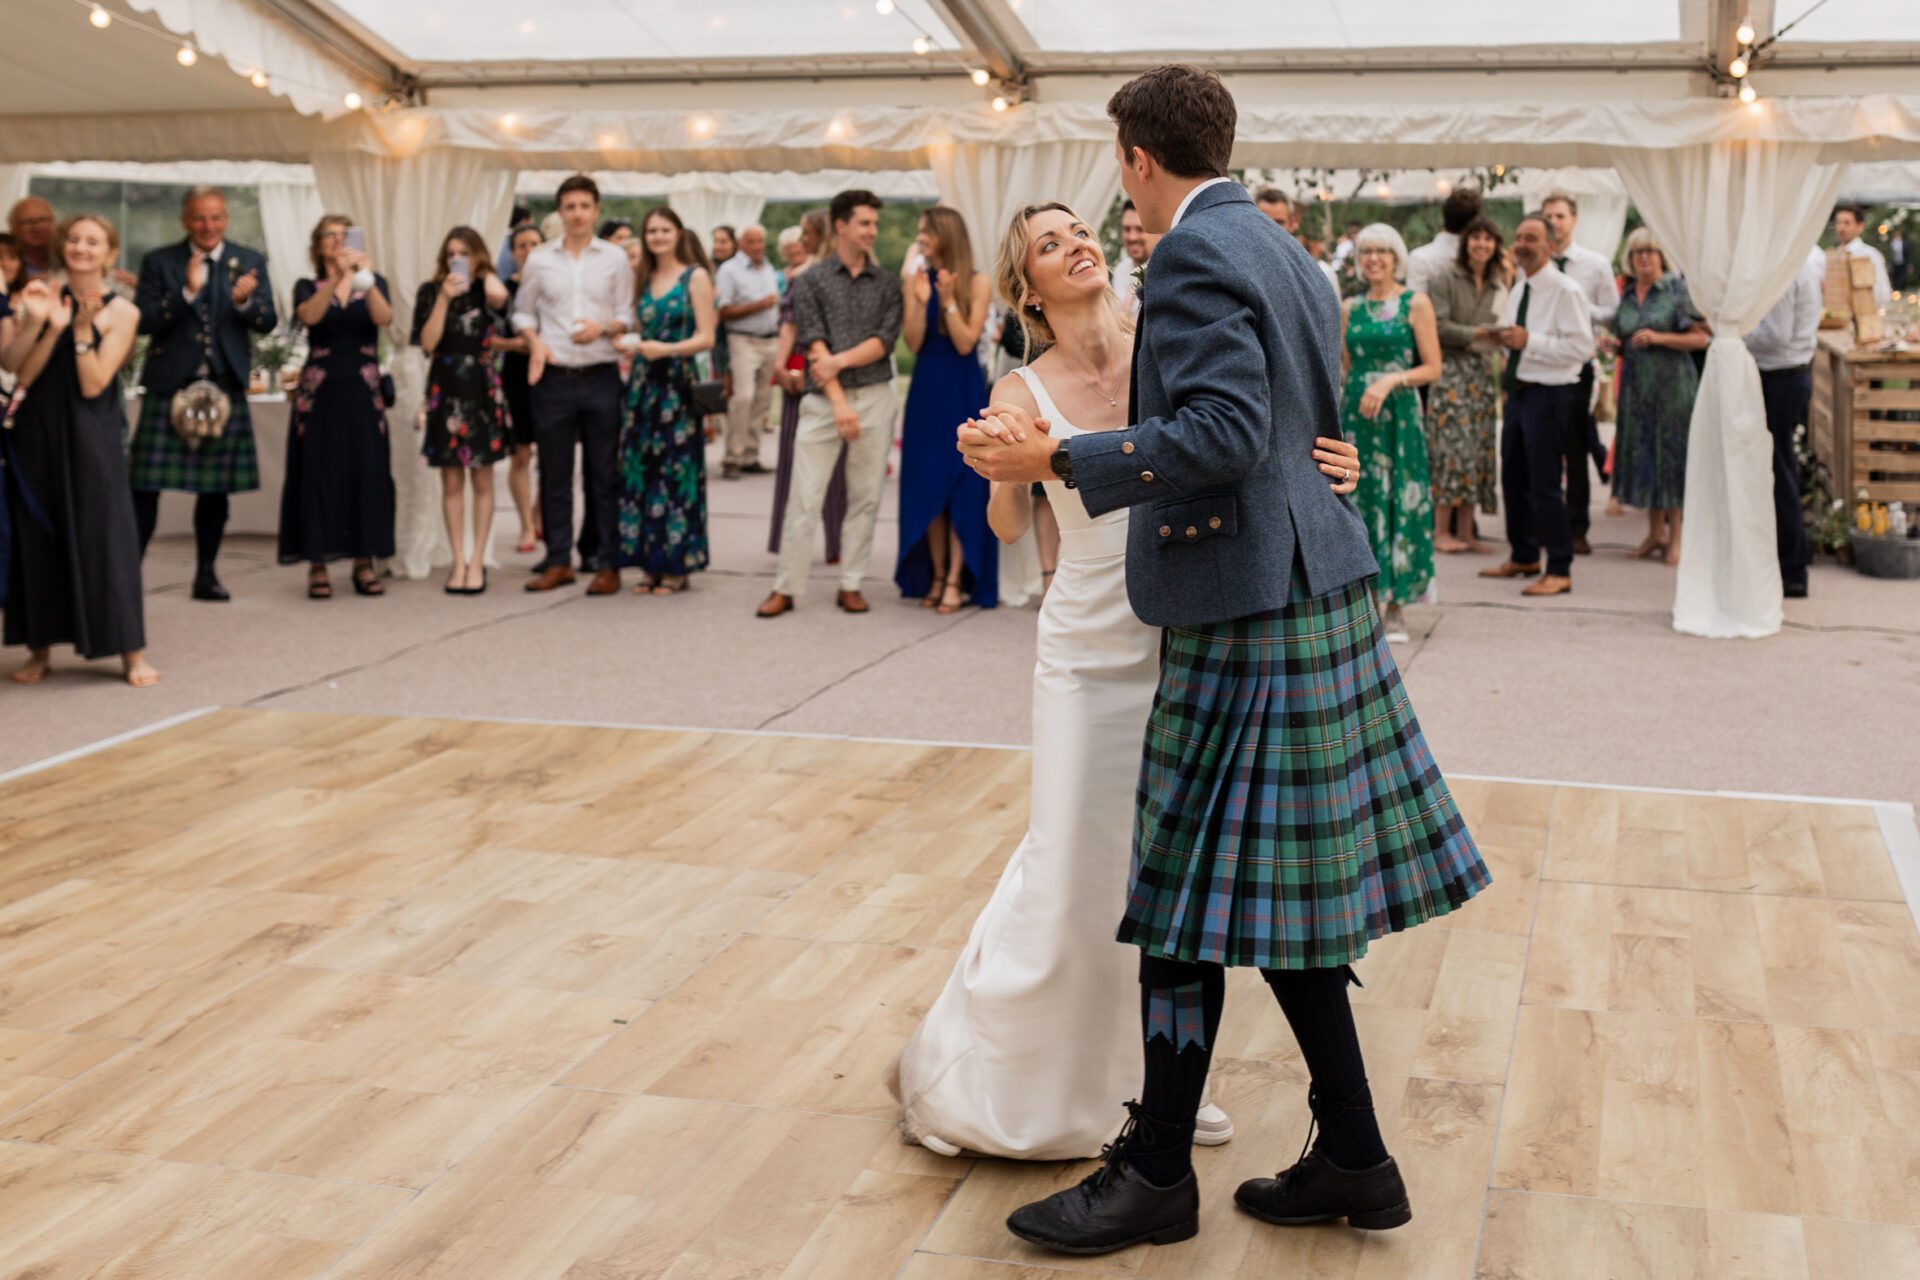 The bride and groom have their first dance at their Devon marquee wedding